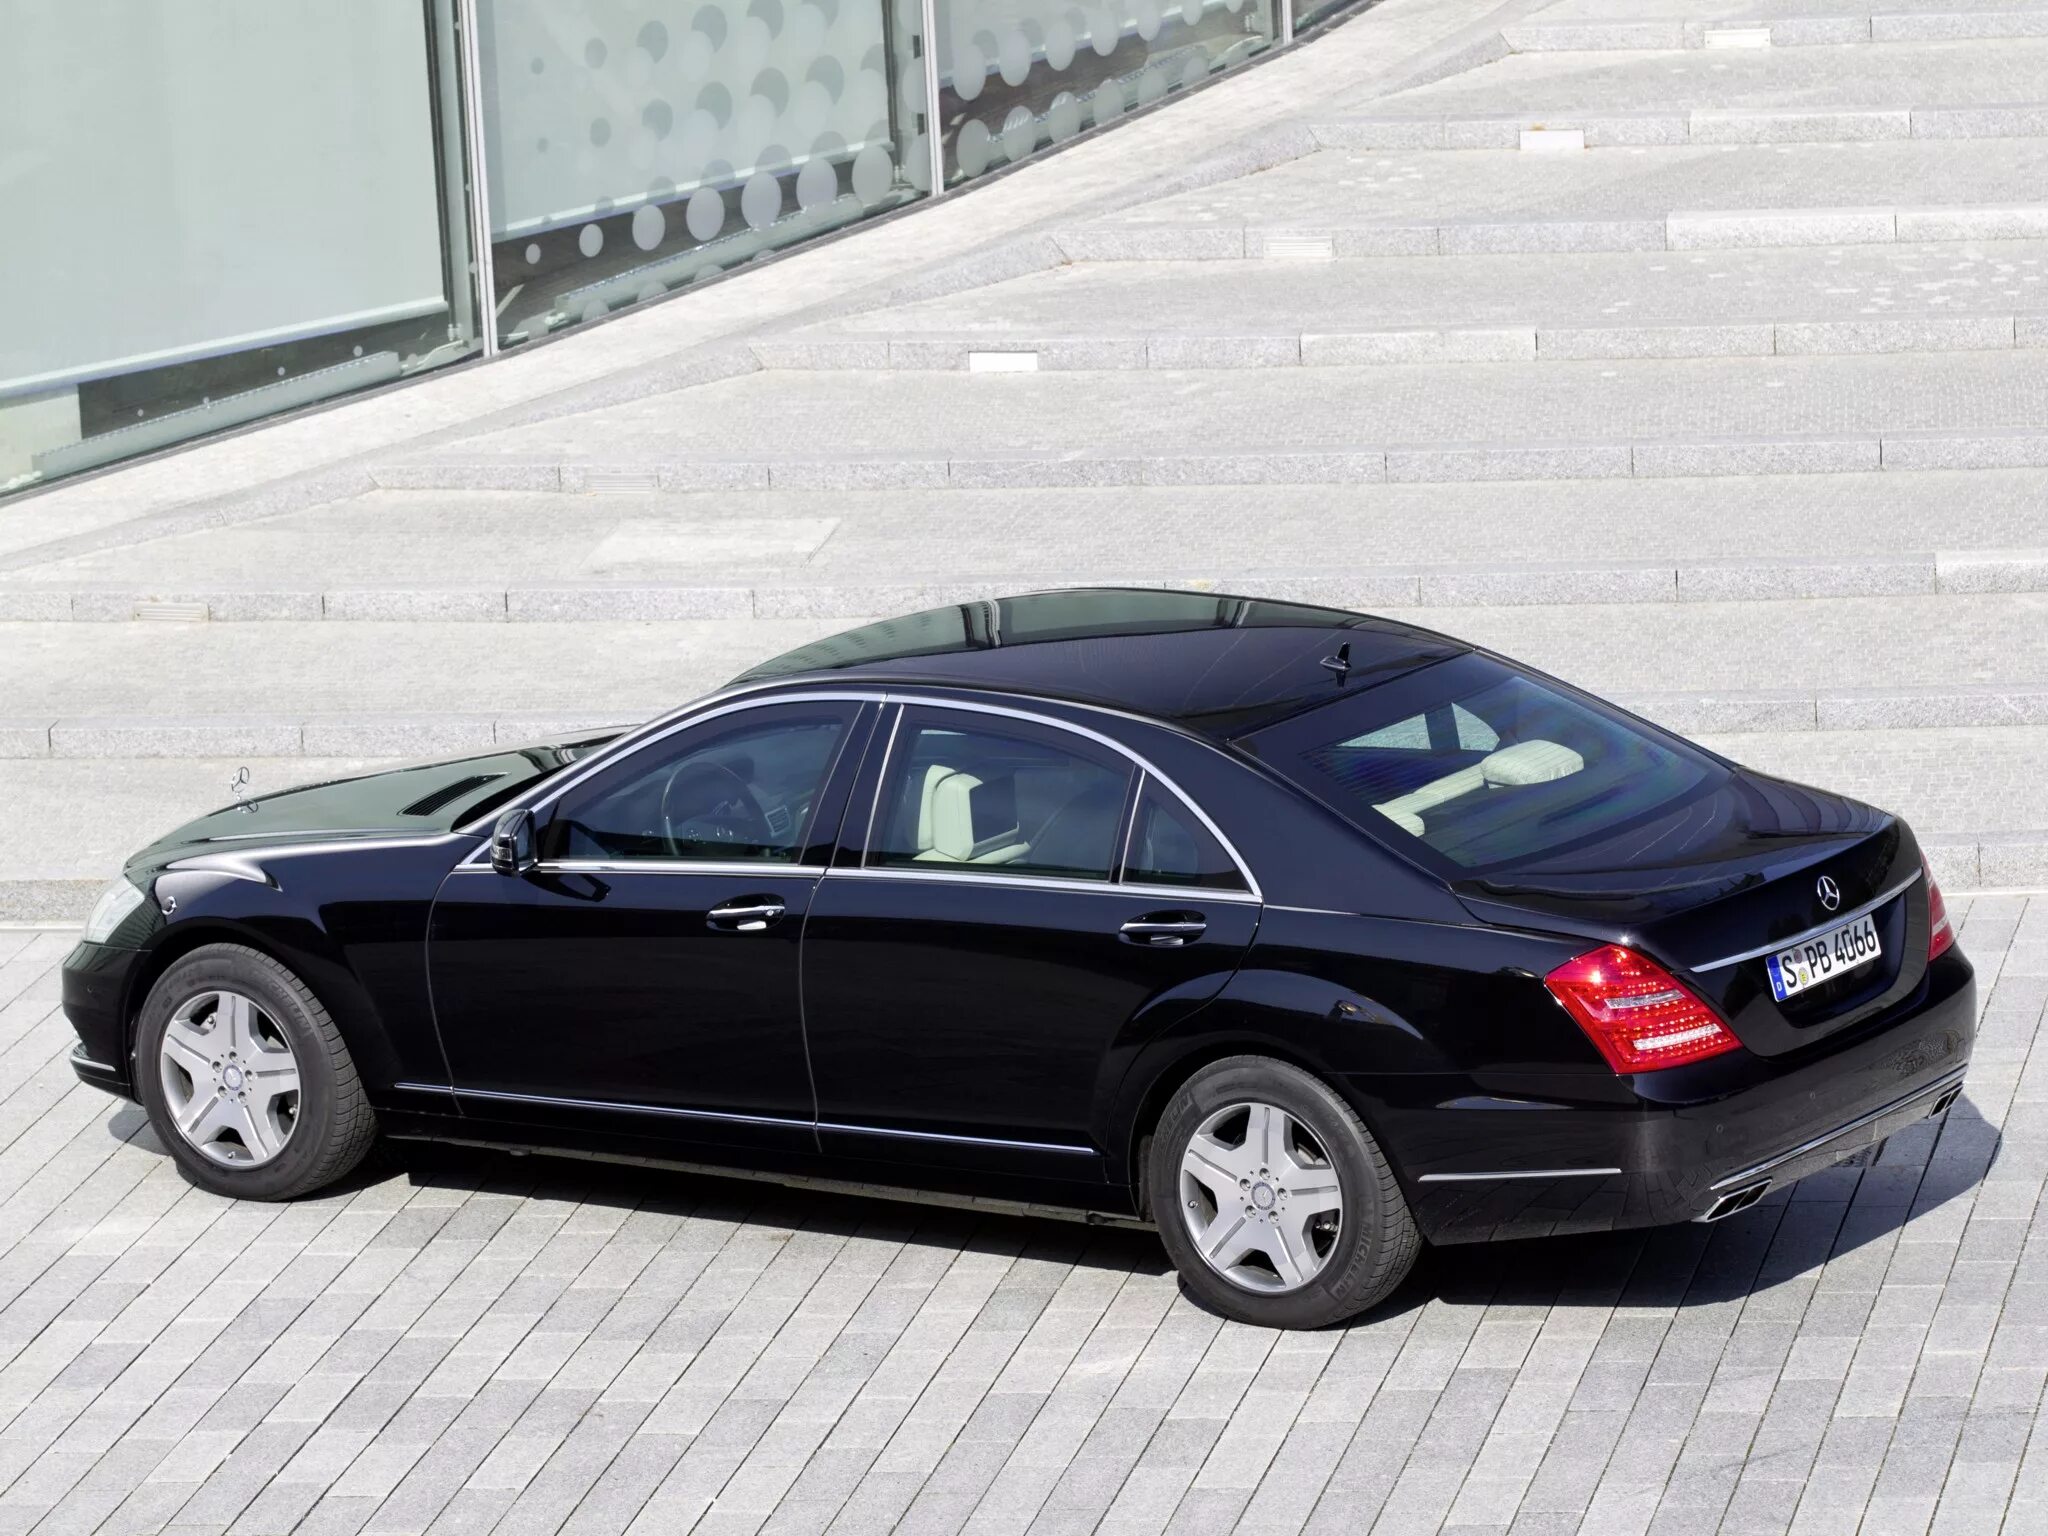 Mercedes-Benz s600 Guard w221. Мерседес s600 w221. Мерседес 221 s600. Бронированный Мерседес s600 221.